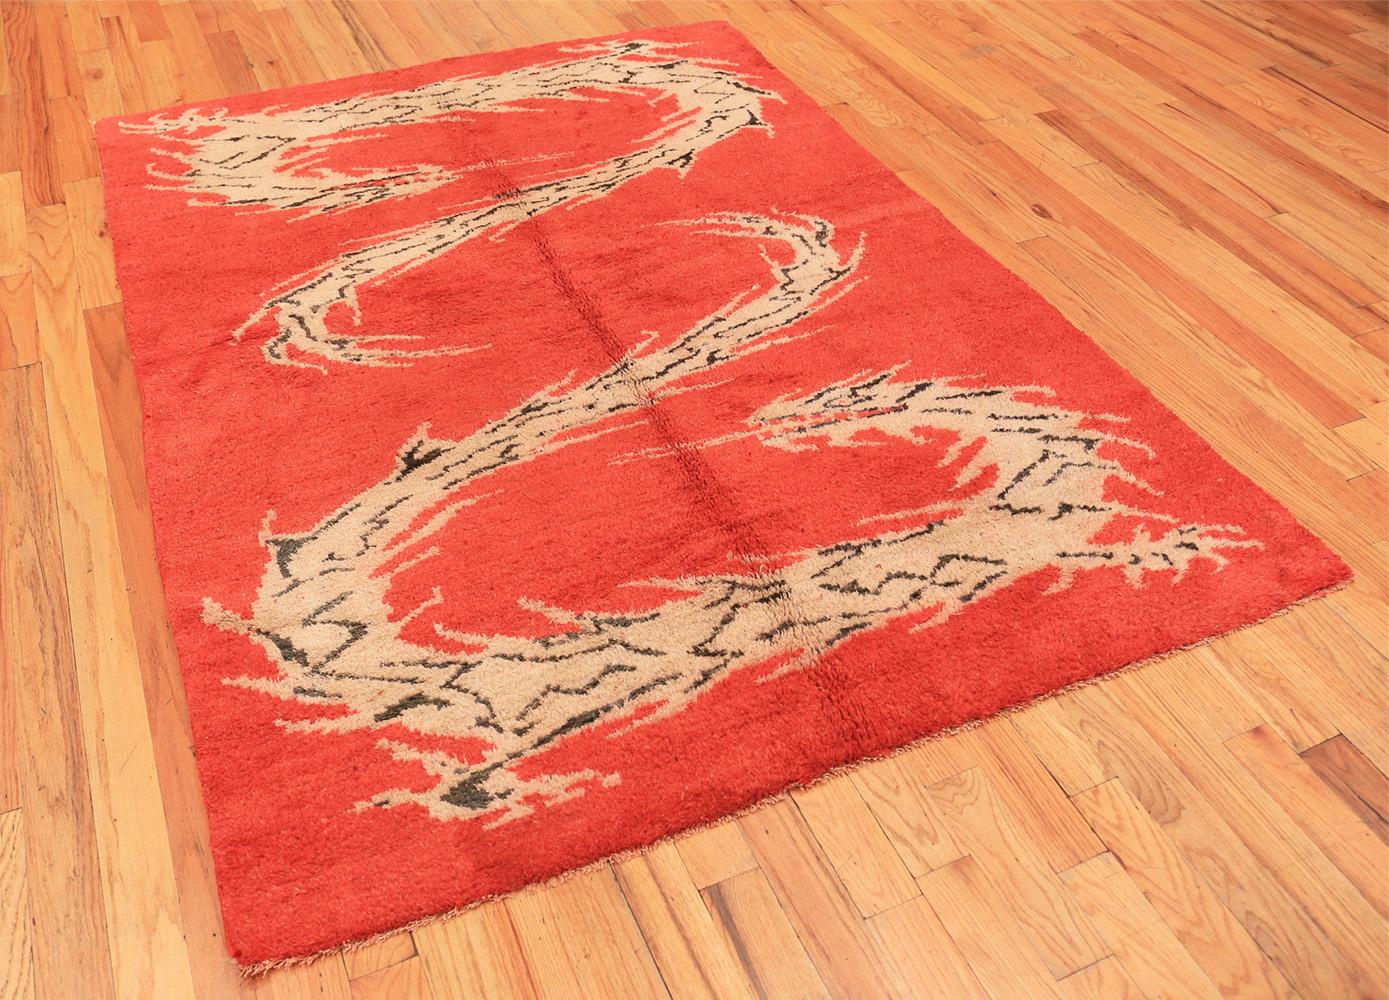 Early 20th Century Antique Indian Dragon Design Rug. Size: 6 ft x 7 ft 10 in (1.83 m x 2.39 m)